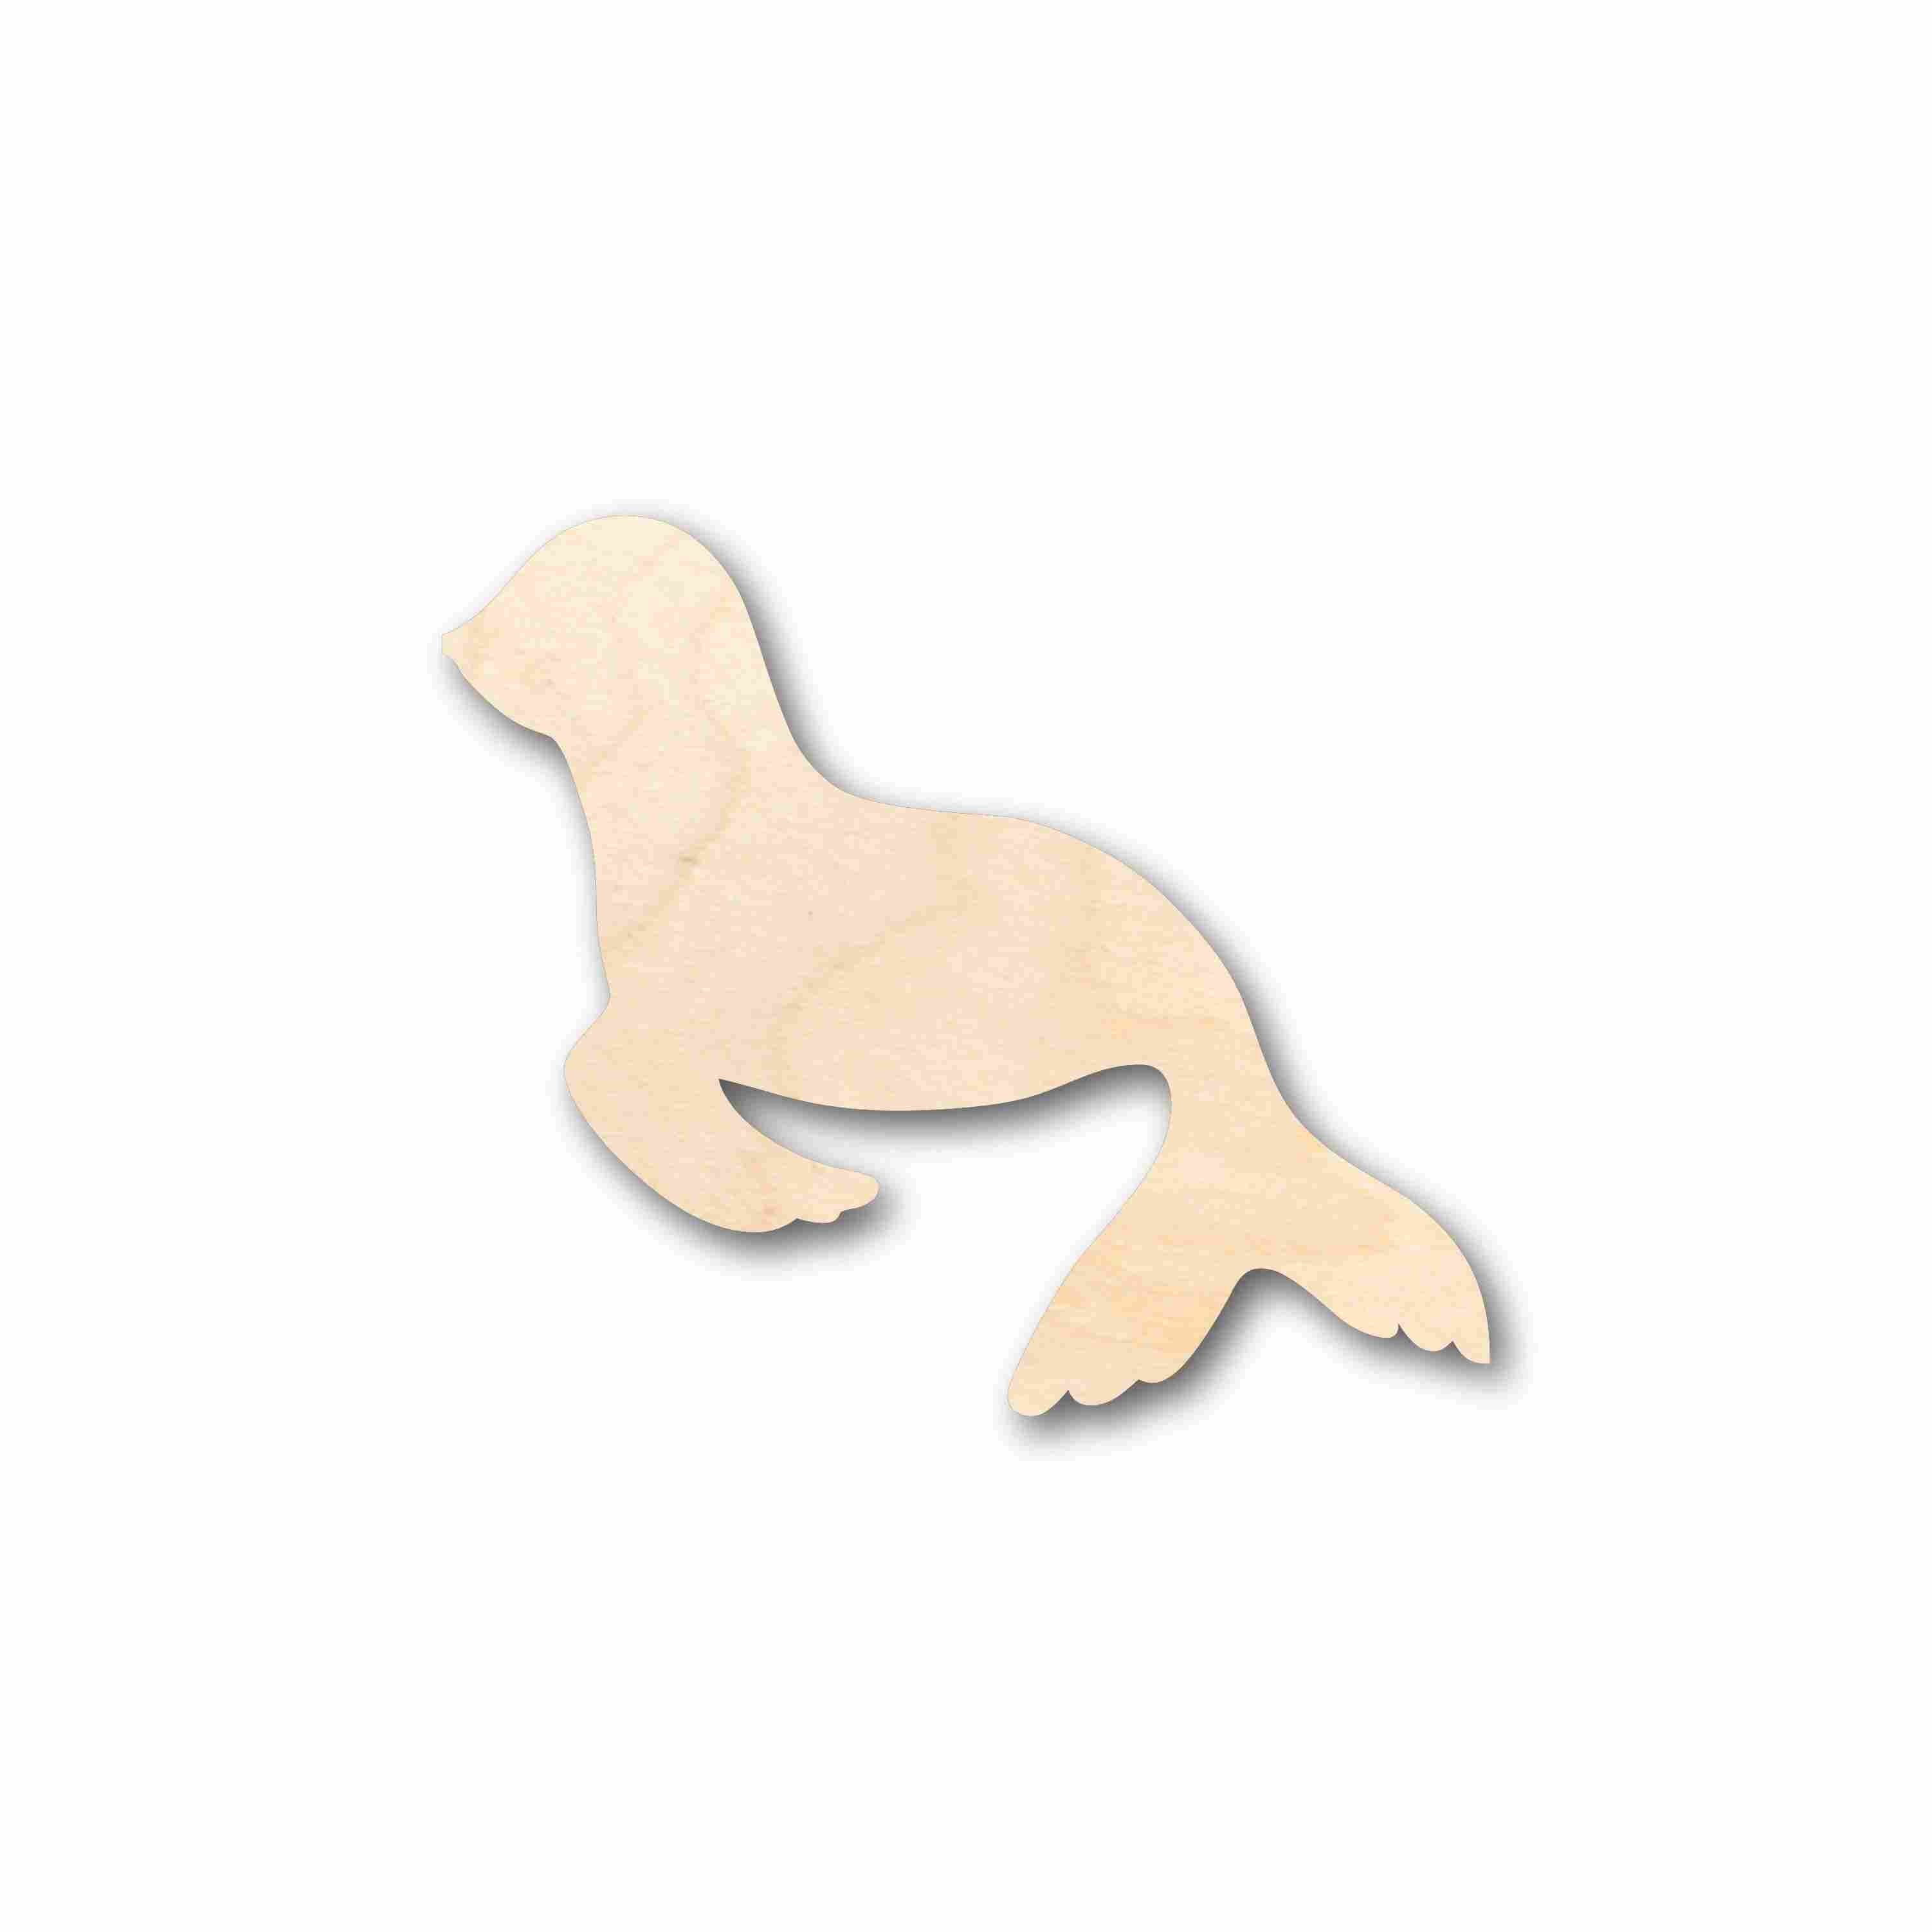 Unfinished Wood Seal Silhouette - Craft- up to 24